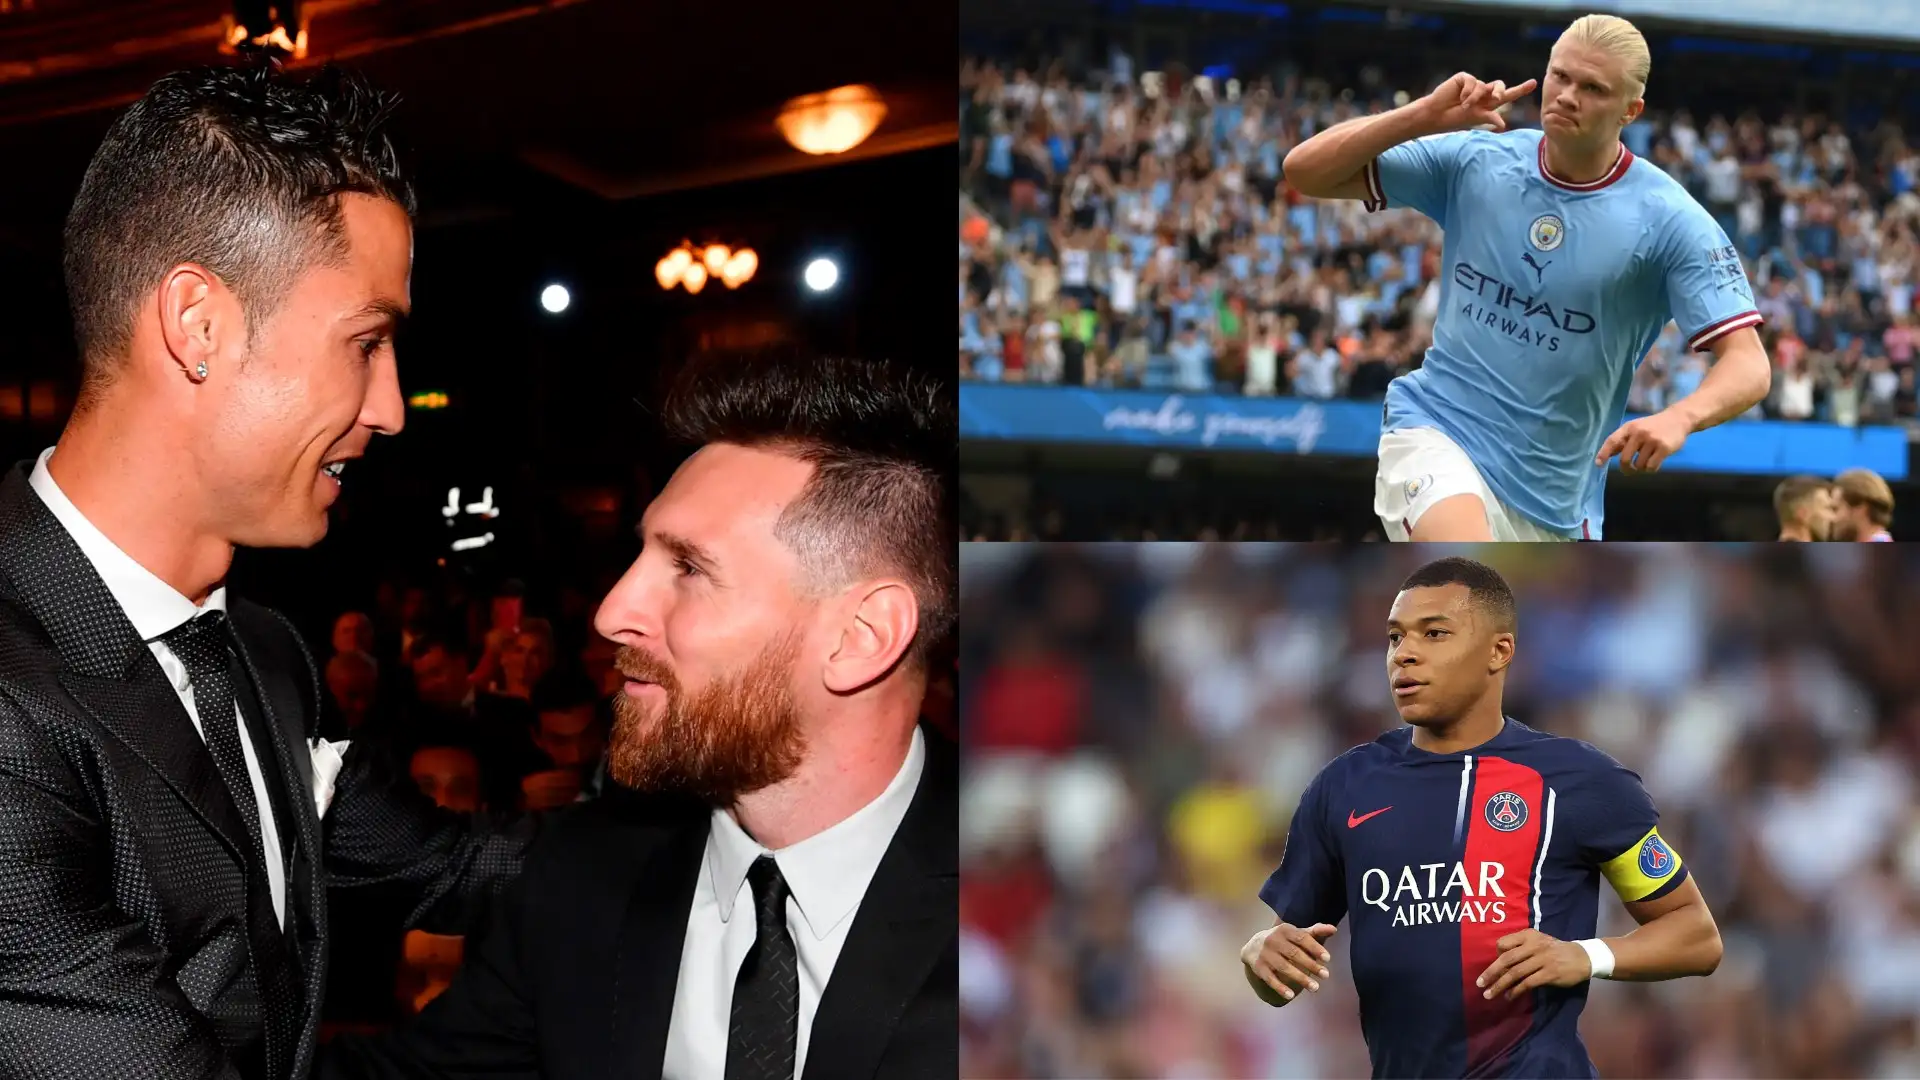 ‘Impossible’ – Erling Haaland and Kylian Mbappe told why they’ll never surpass Cristiano Ronaldo and Lionel Messi